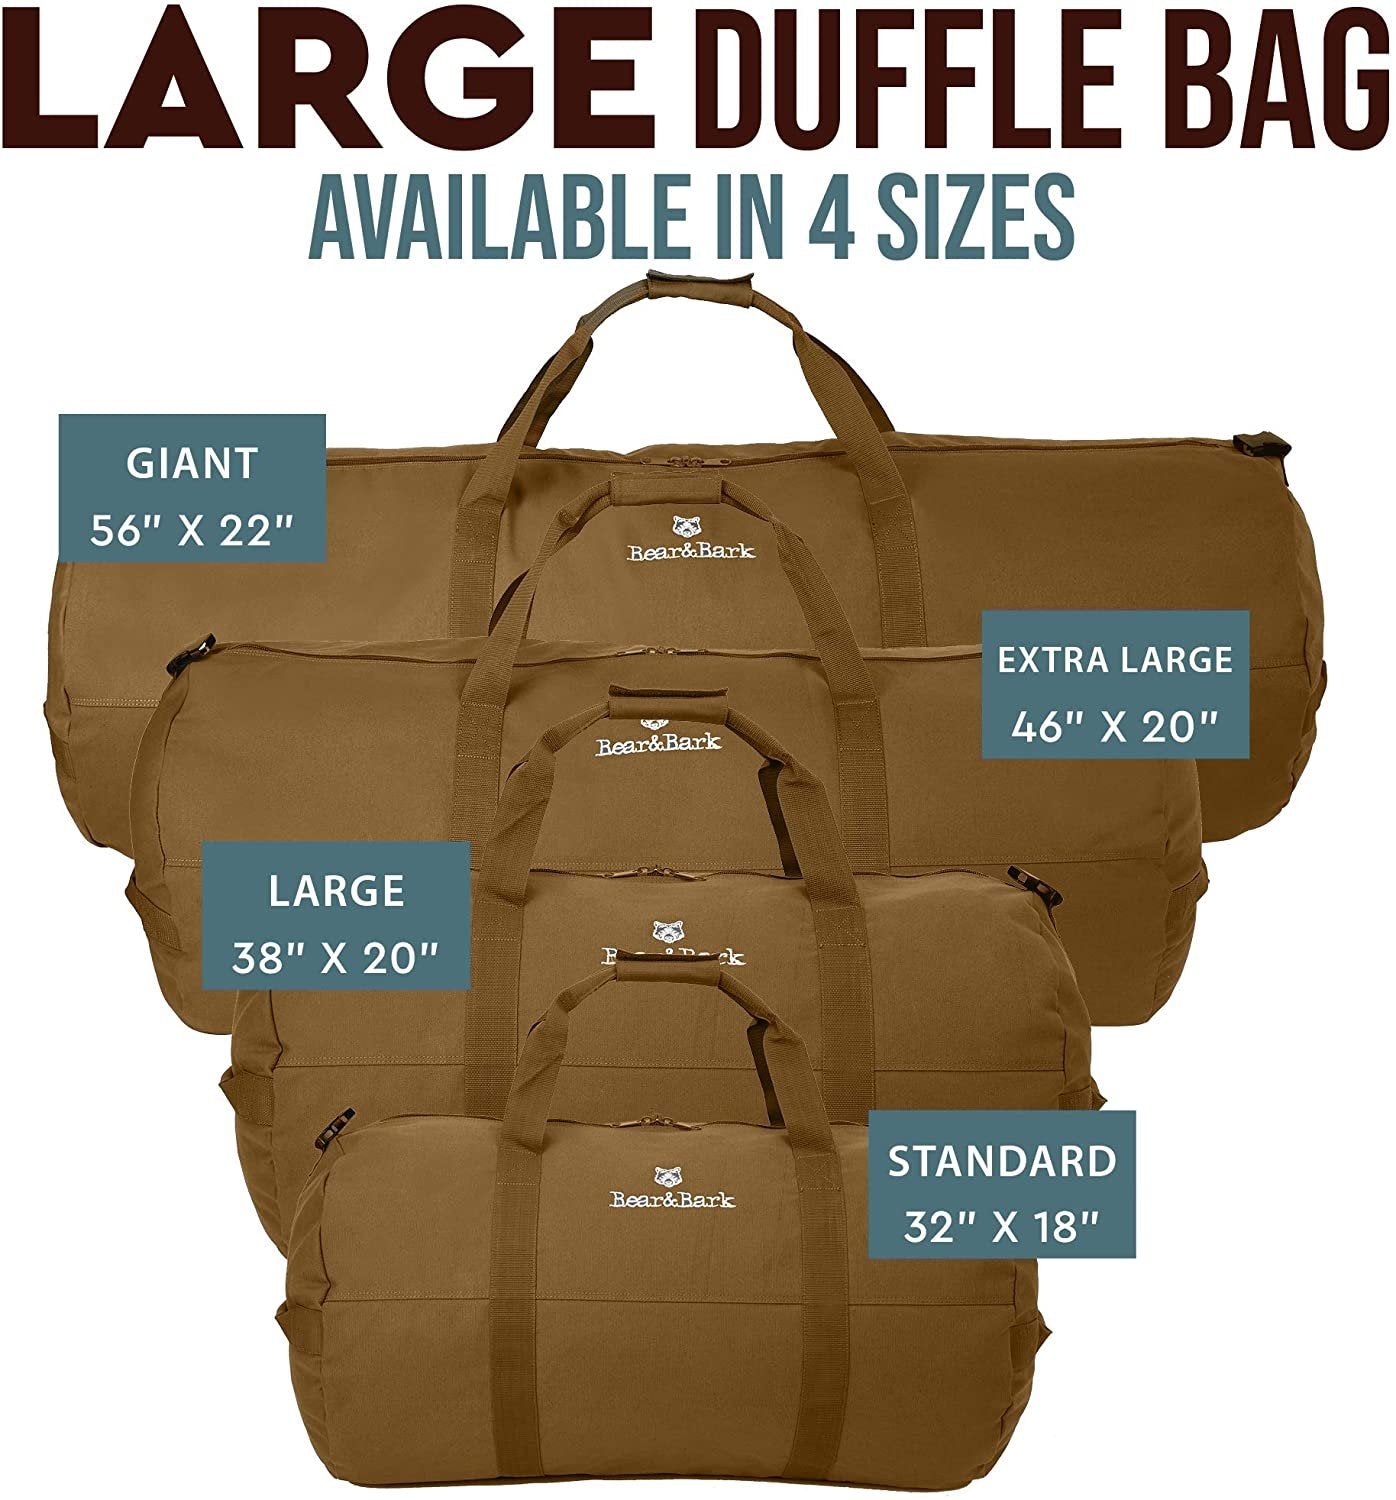 Large Black Military Canvas Duffel Bag 38x20 - Army Cargo Style Carryall for Men/Women - Free Shipping